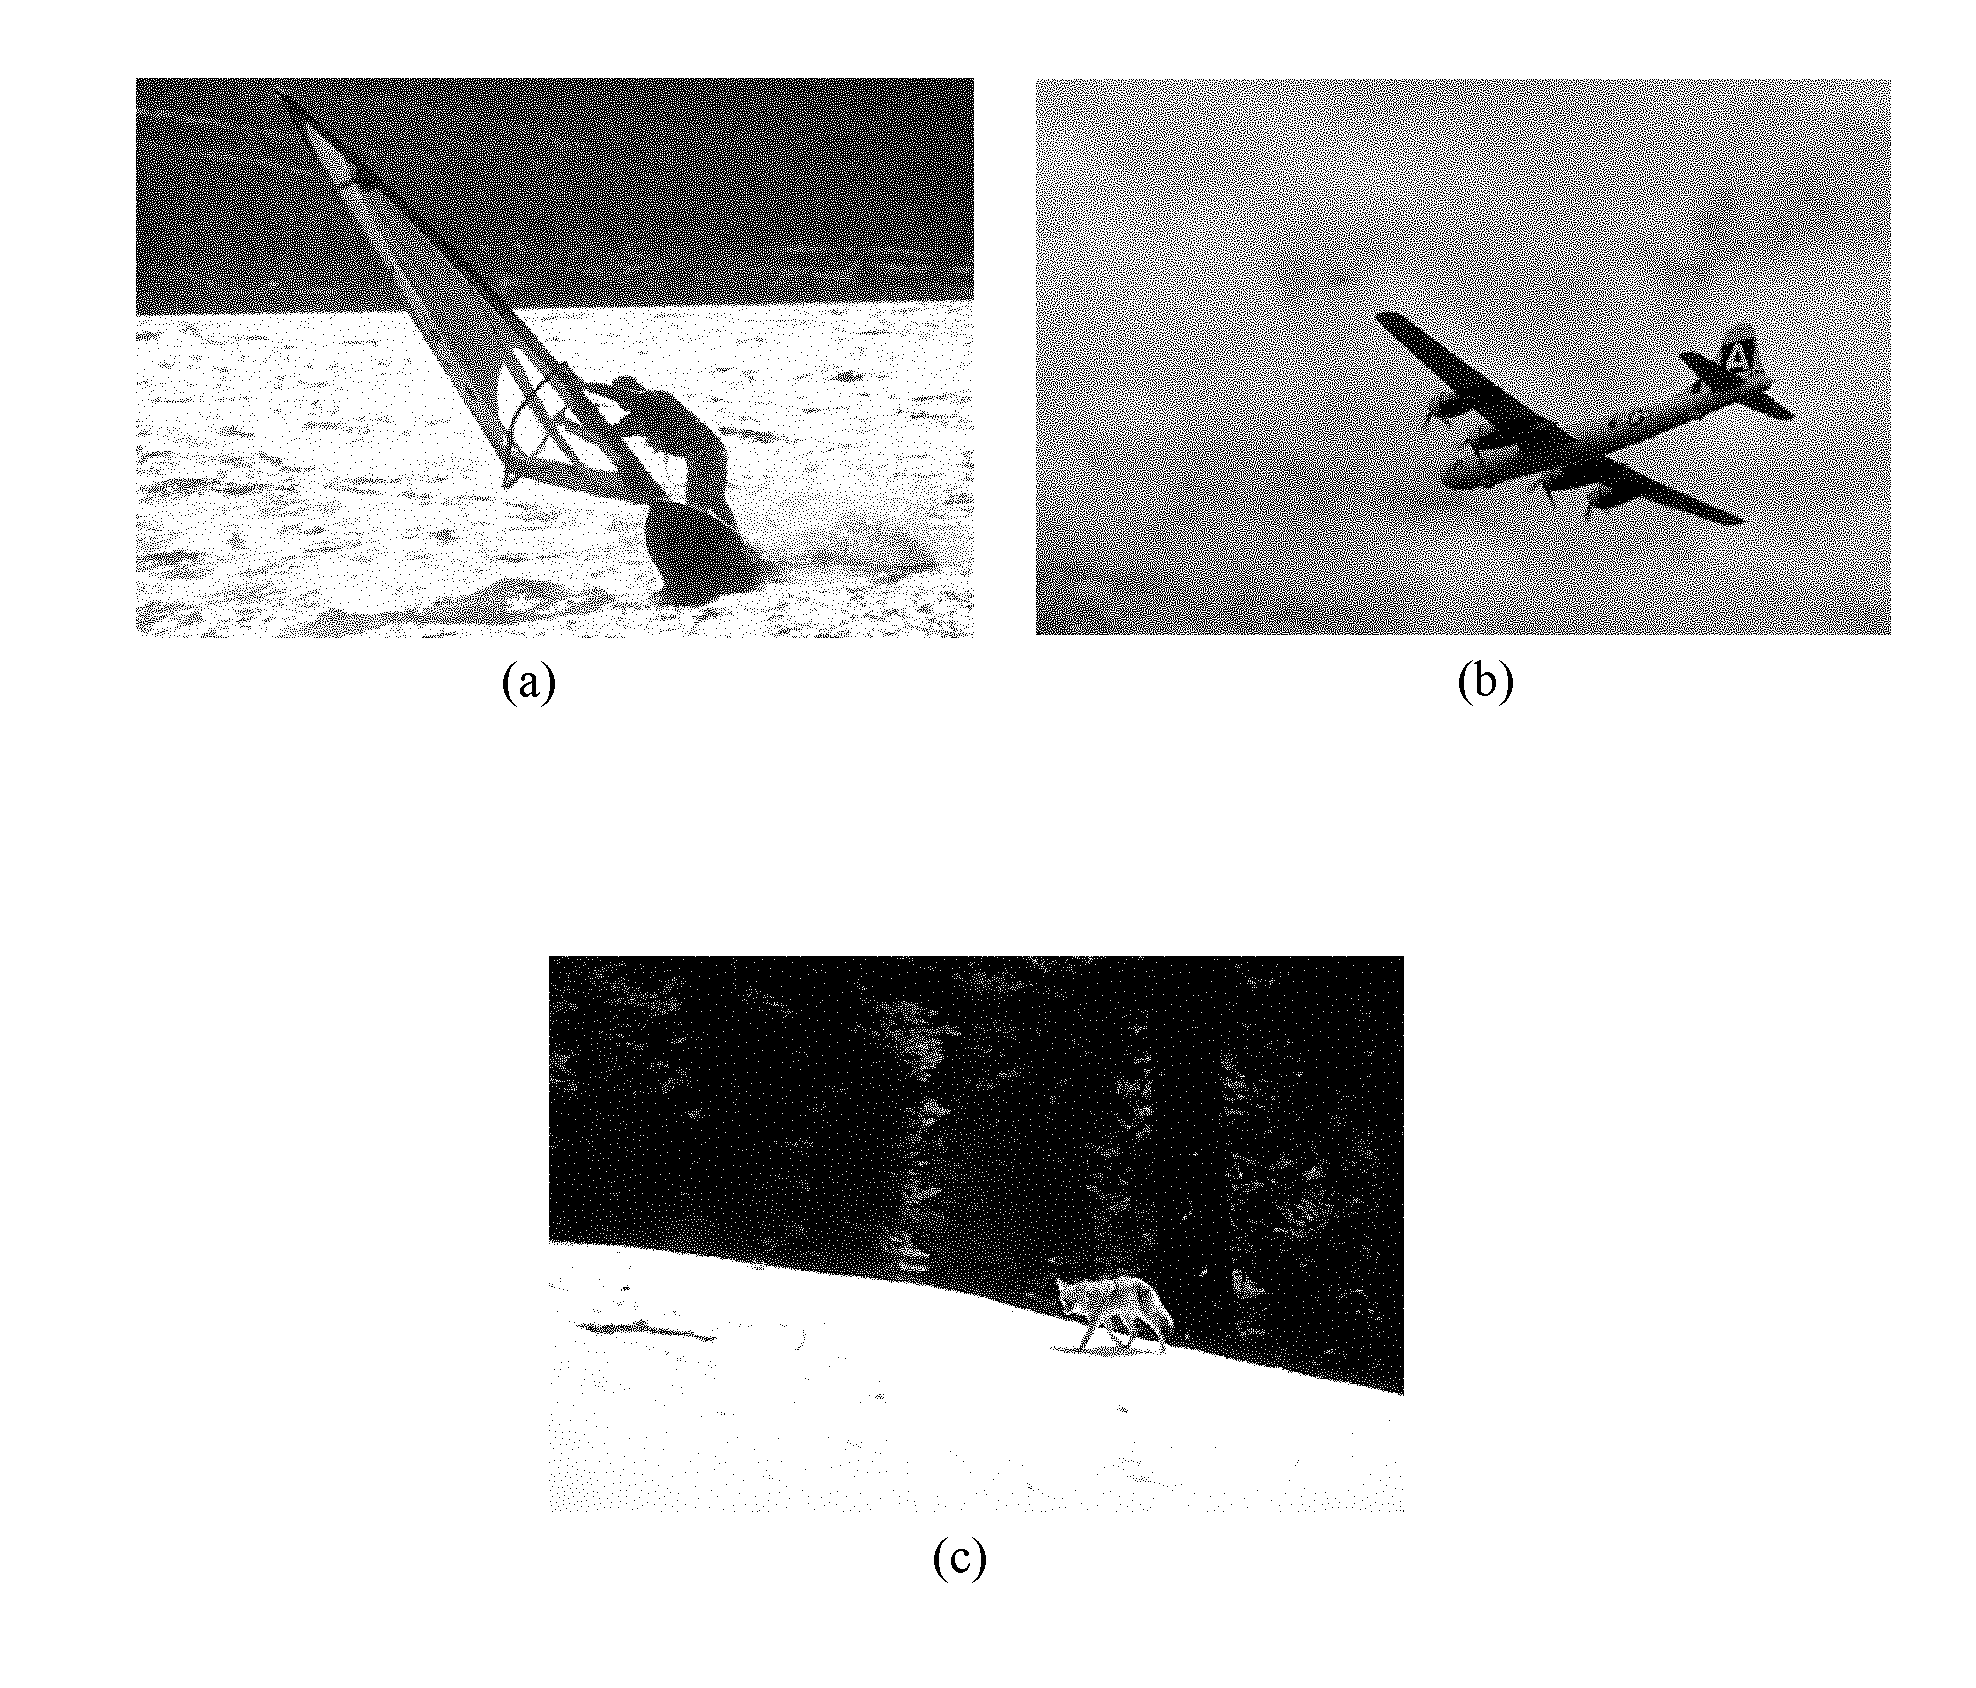 Method for performing image segmentation by using manifold spectral clustering